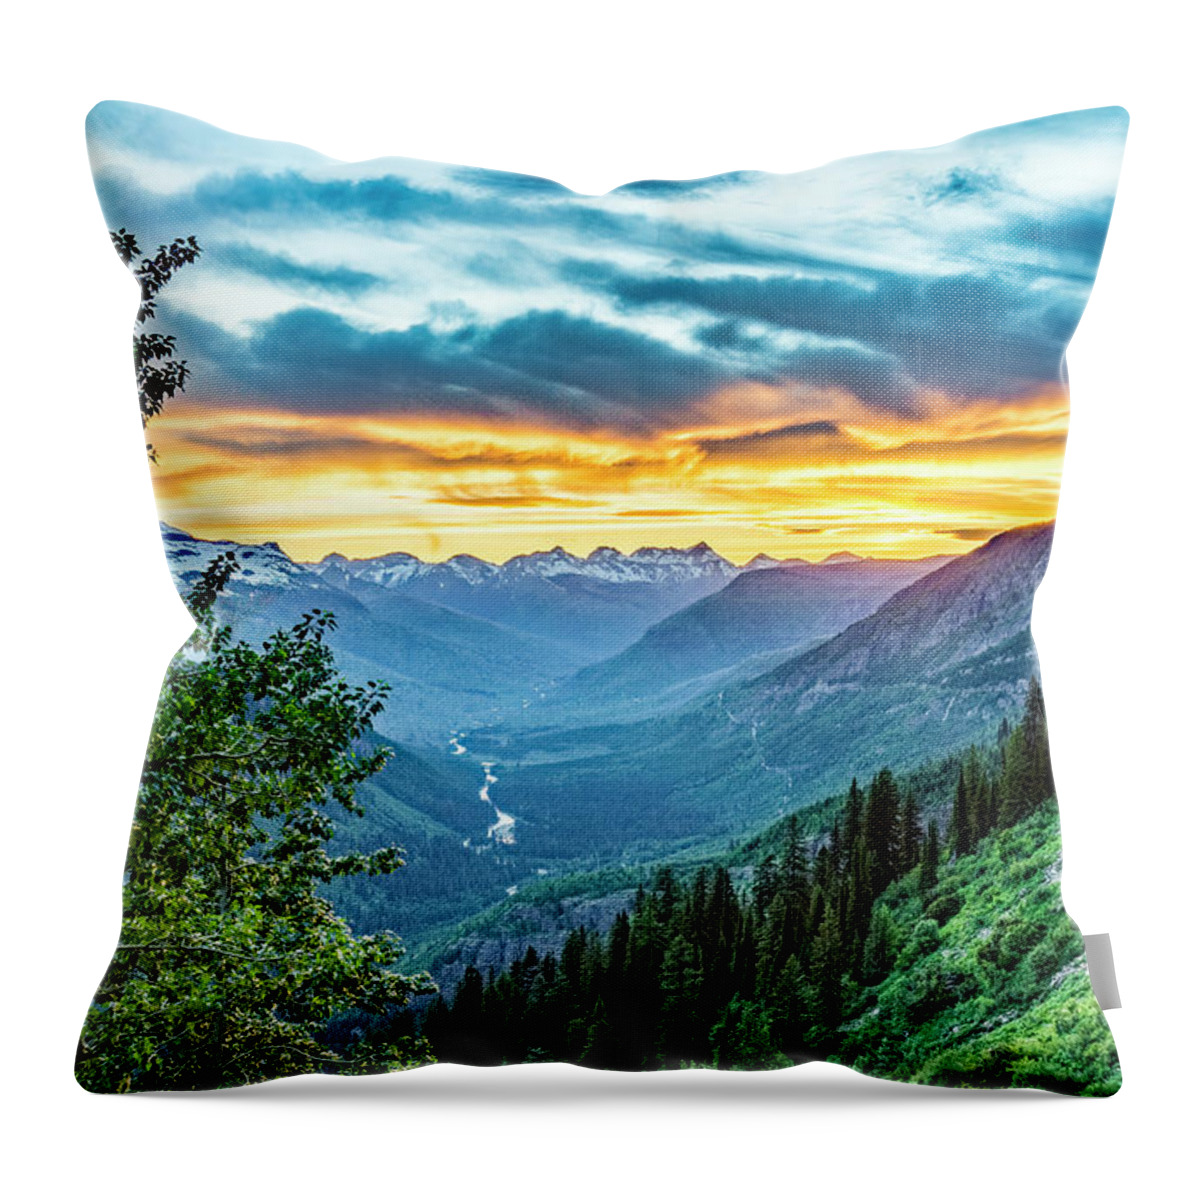 Glacier National Park Throw Pillow featuring the photograph Jackson Glacier Overlook At Sunset by Donald Pash